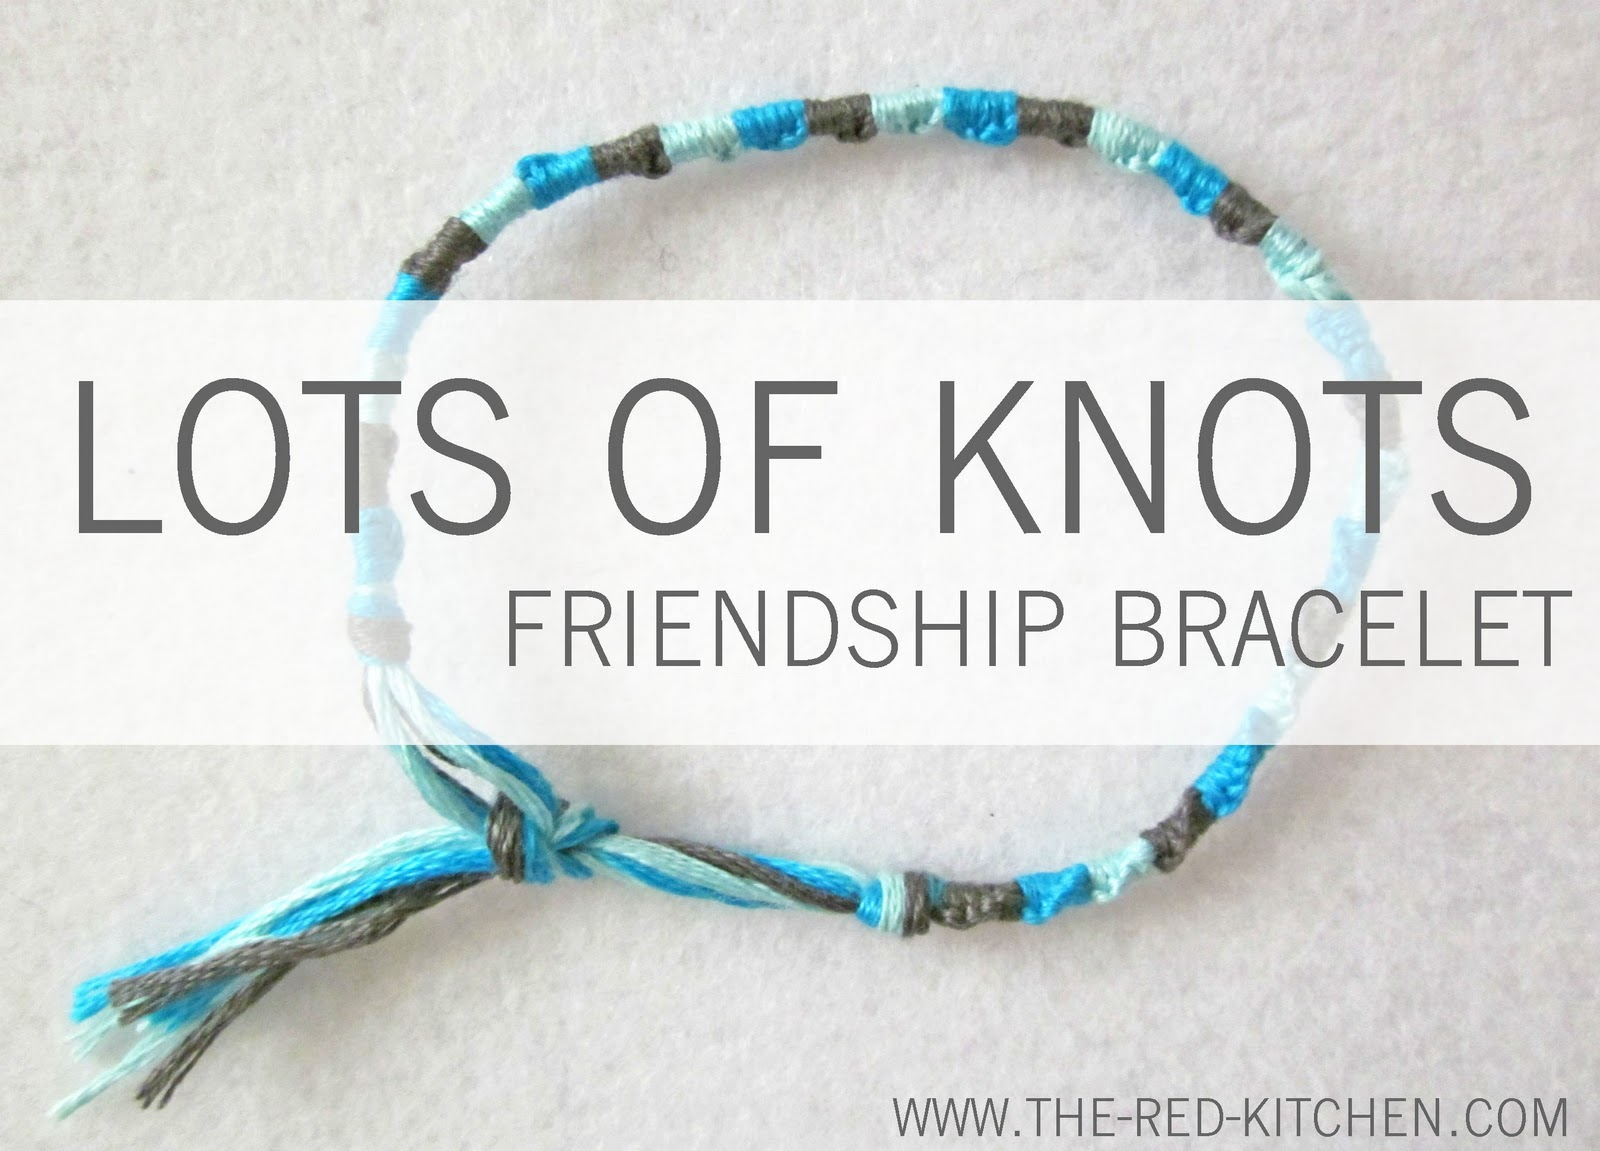 Embroidery Floss Bracelet Patterns The Red Kitchen Lots Of Knots Friendship Bracelet A Tutorial In 6